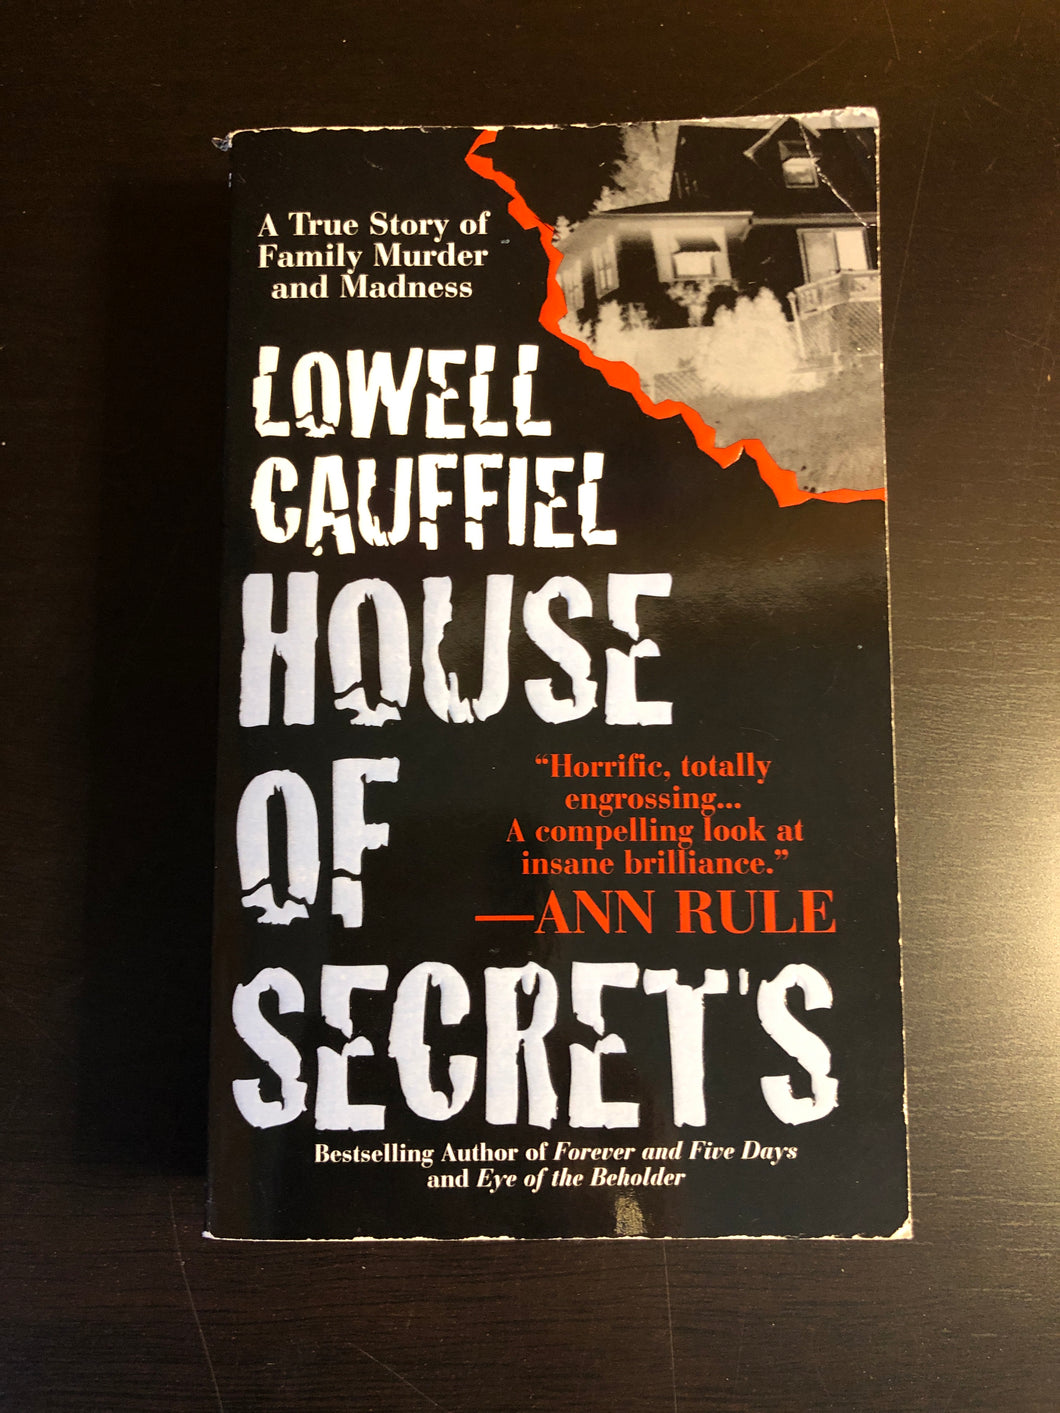 House of Secrets: A True Story of Family Murder and Madness